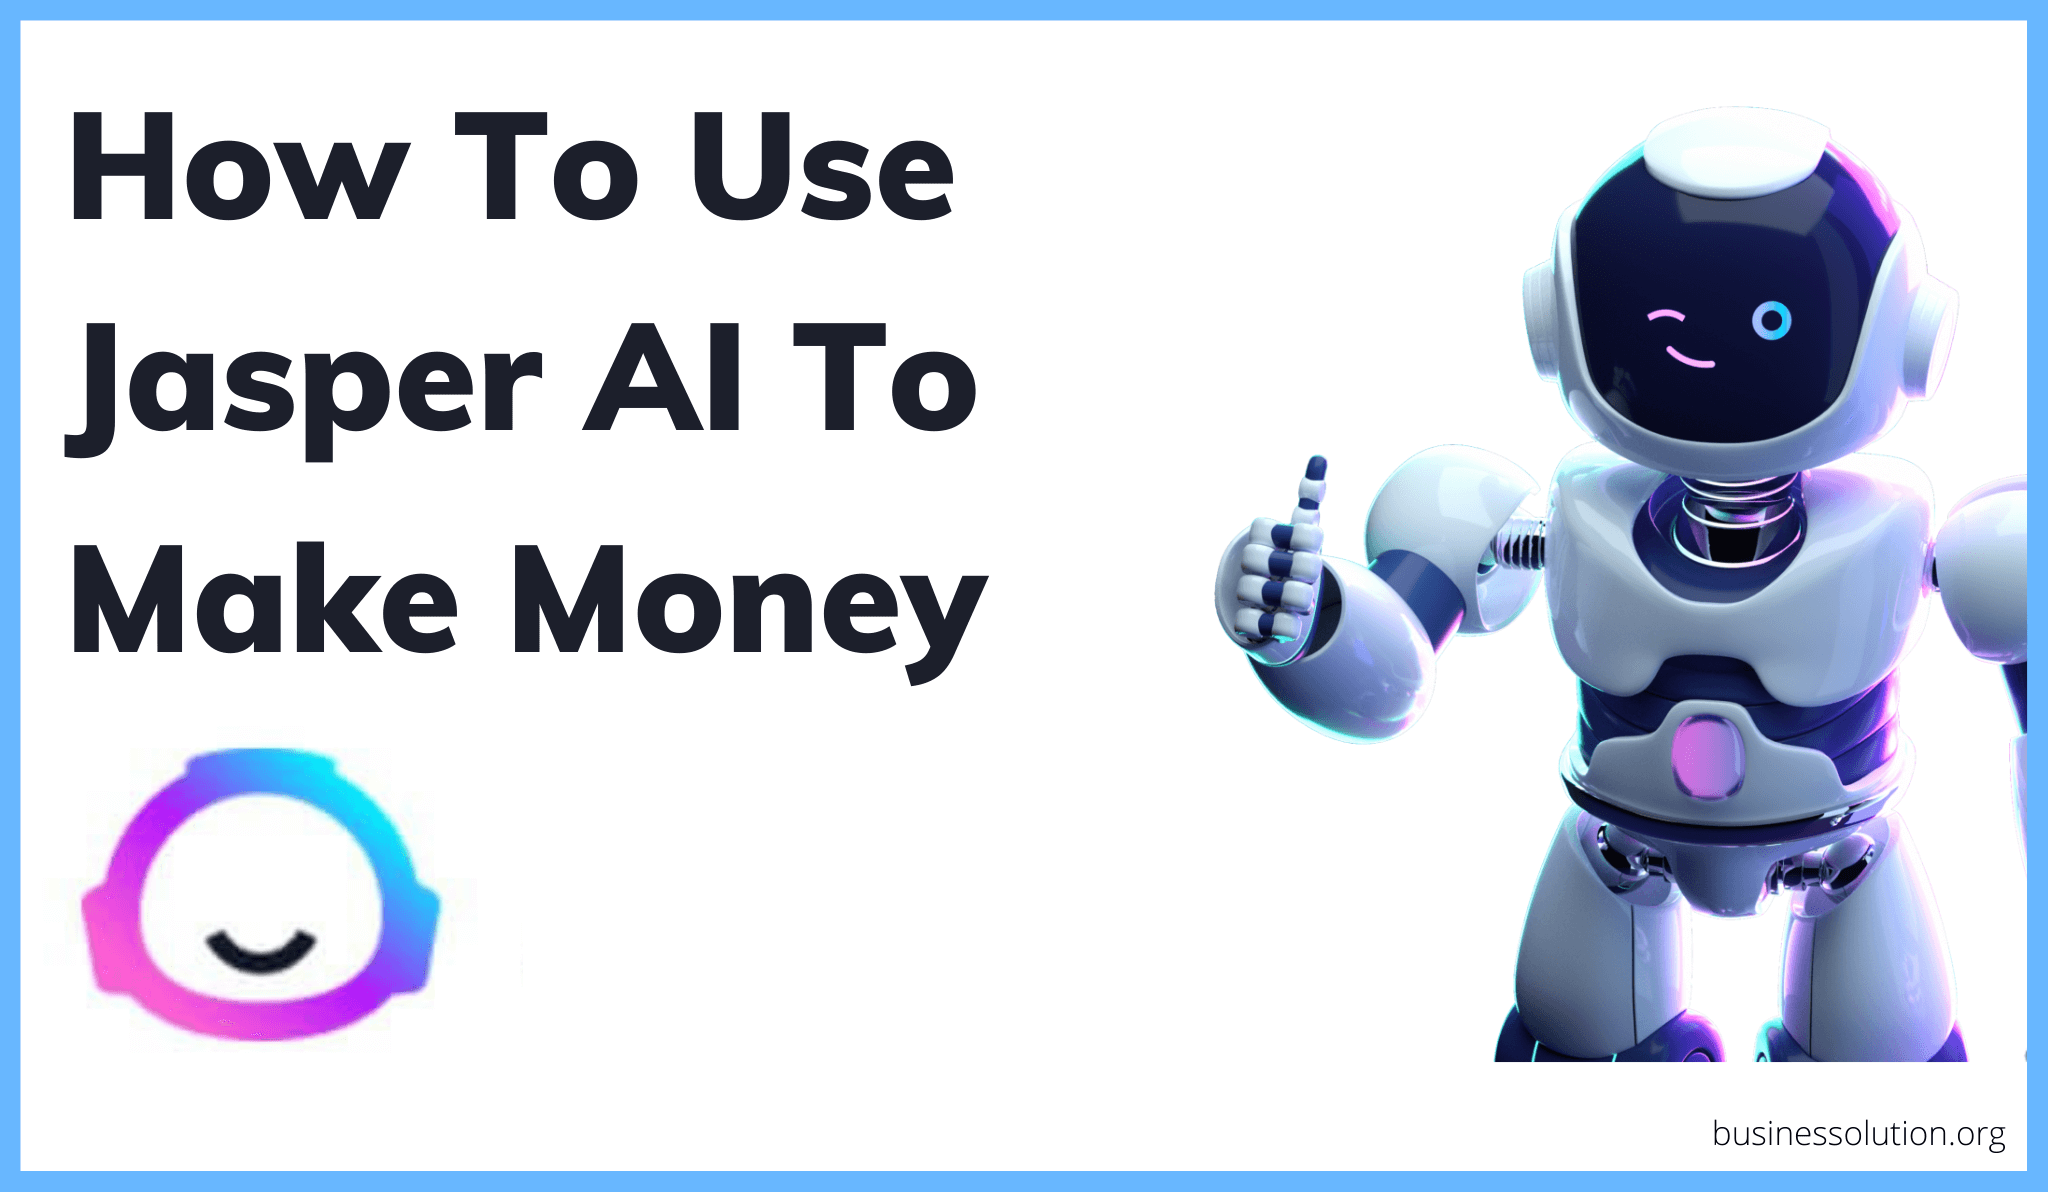 What Are Some Common Misconceptions People Have About Making Money With Jasper AI? Addressing Mistaken Beliefs About Earning With Jasper AI. Monetizing Jasper AI Misconceptions False Assumptions, Earning Misconceptions